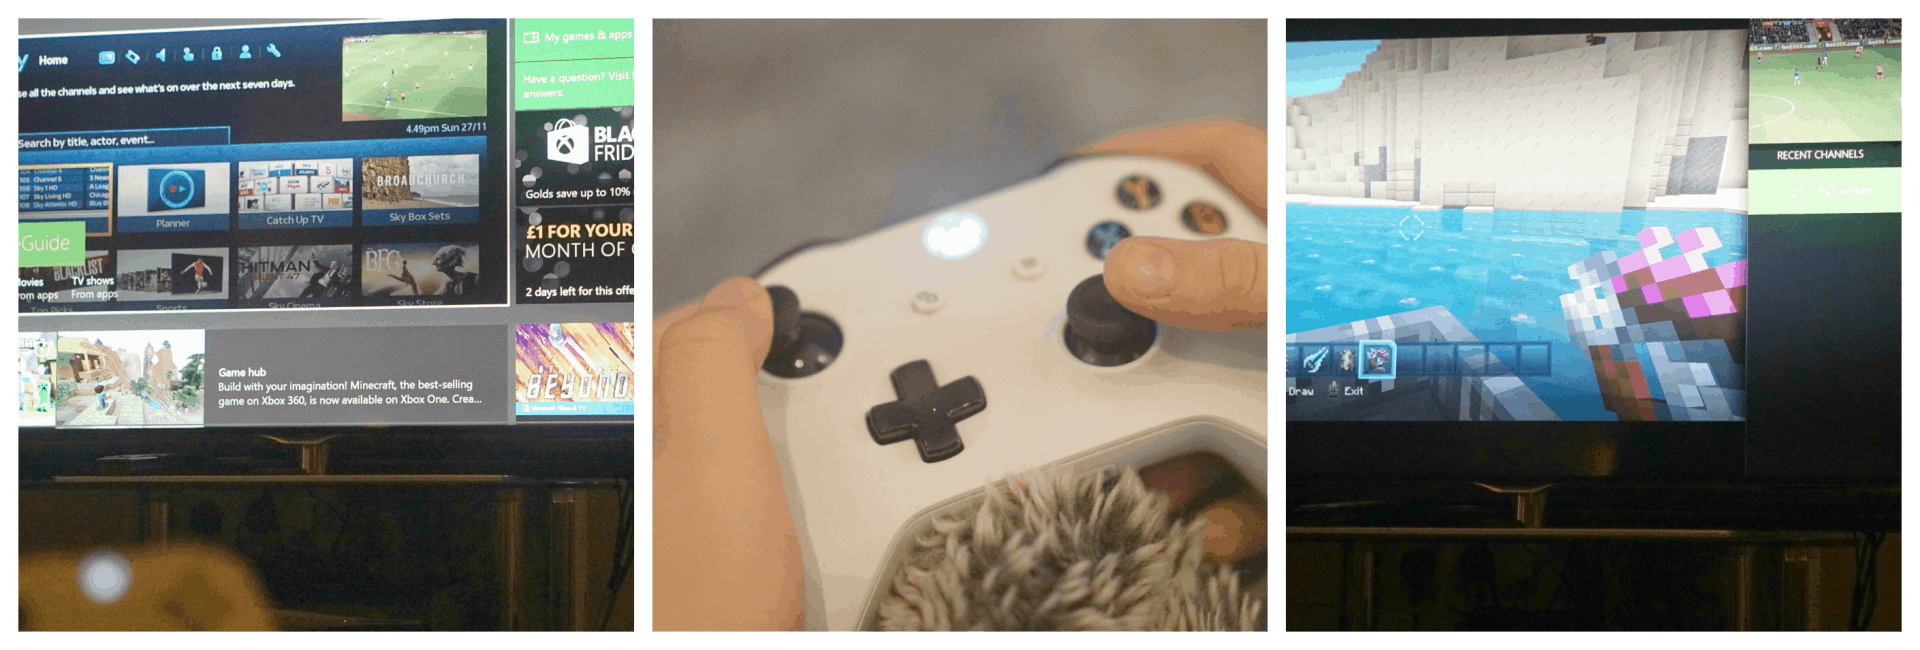 10 Things I Never Knew The Xbox One S Did!